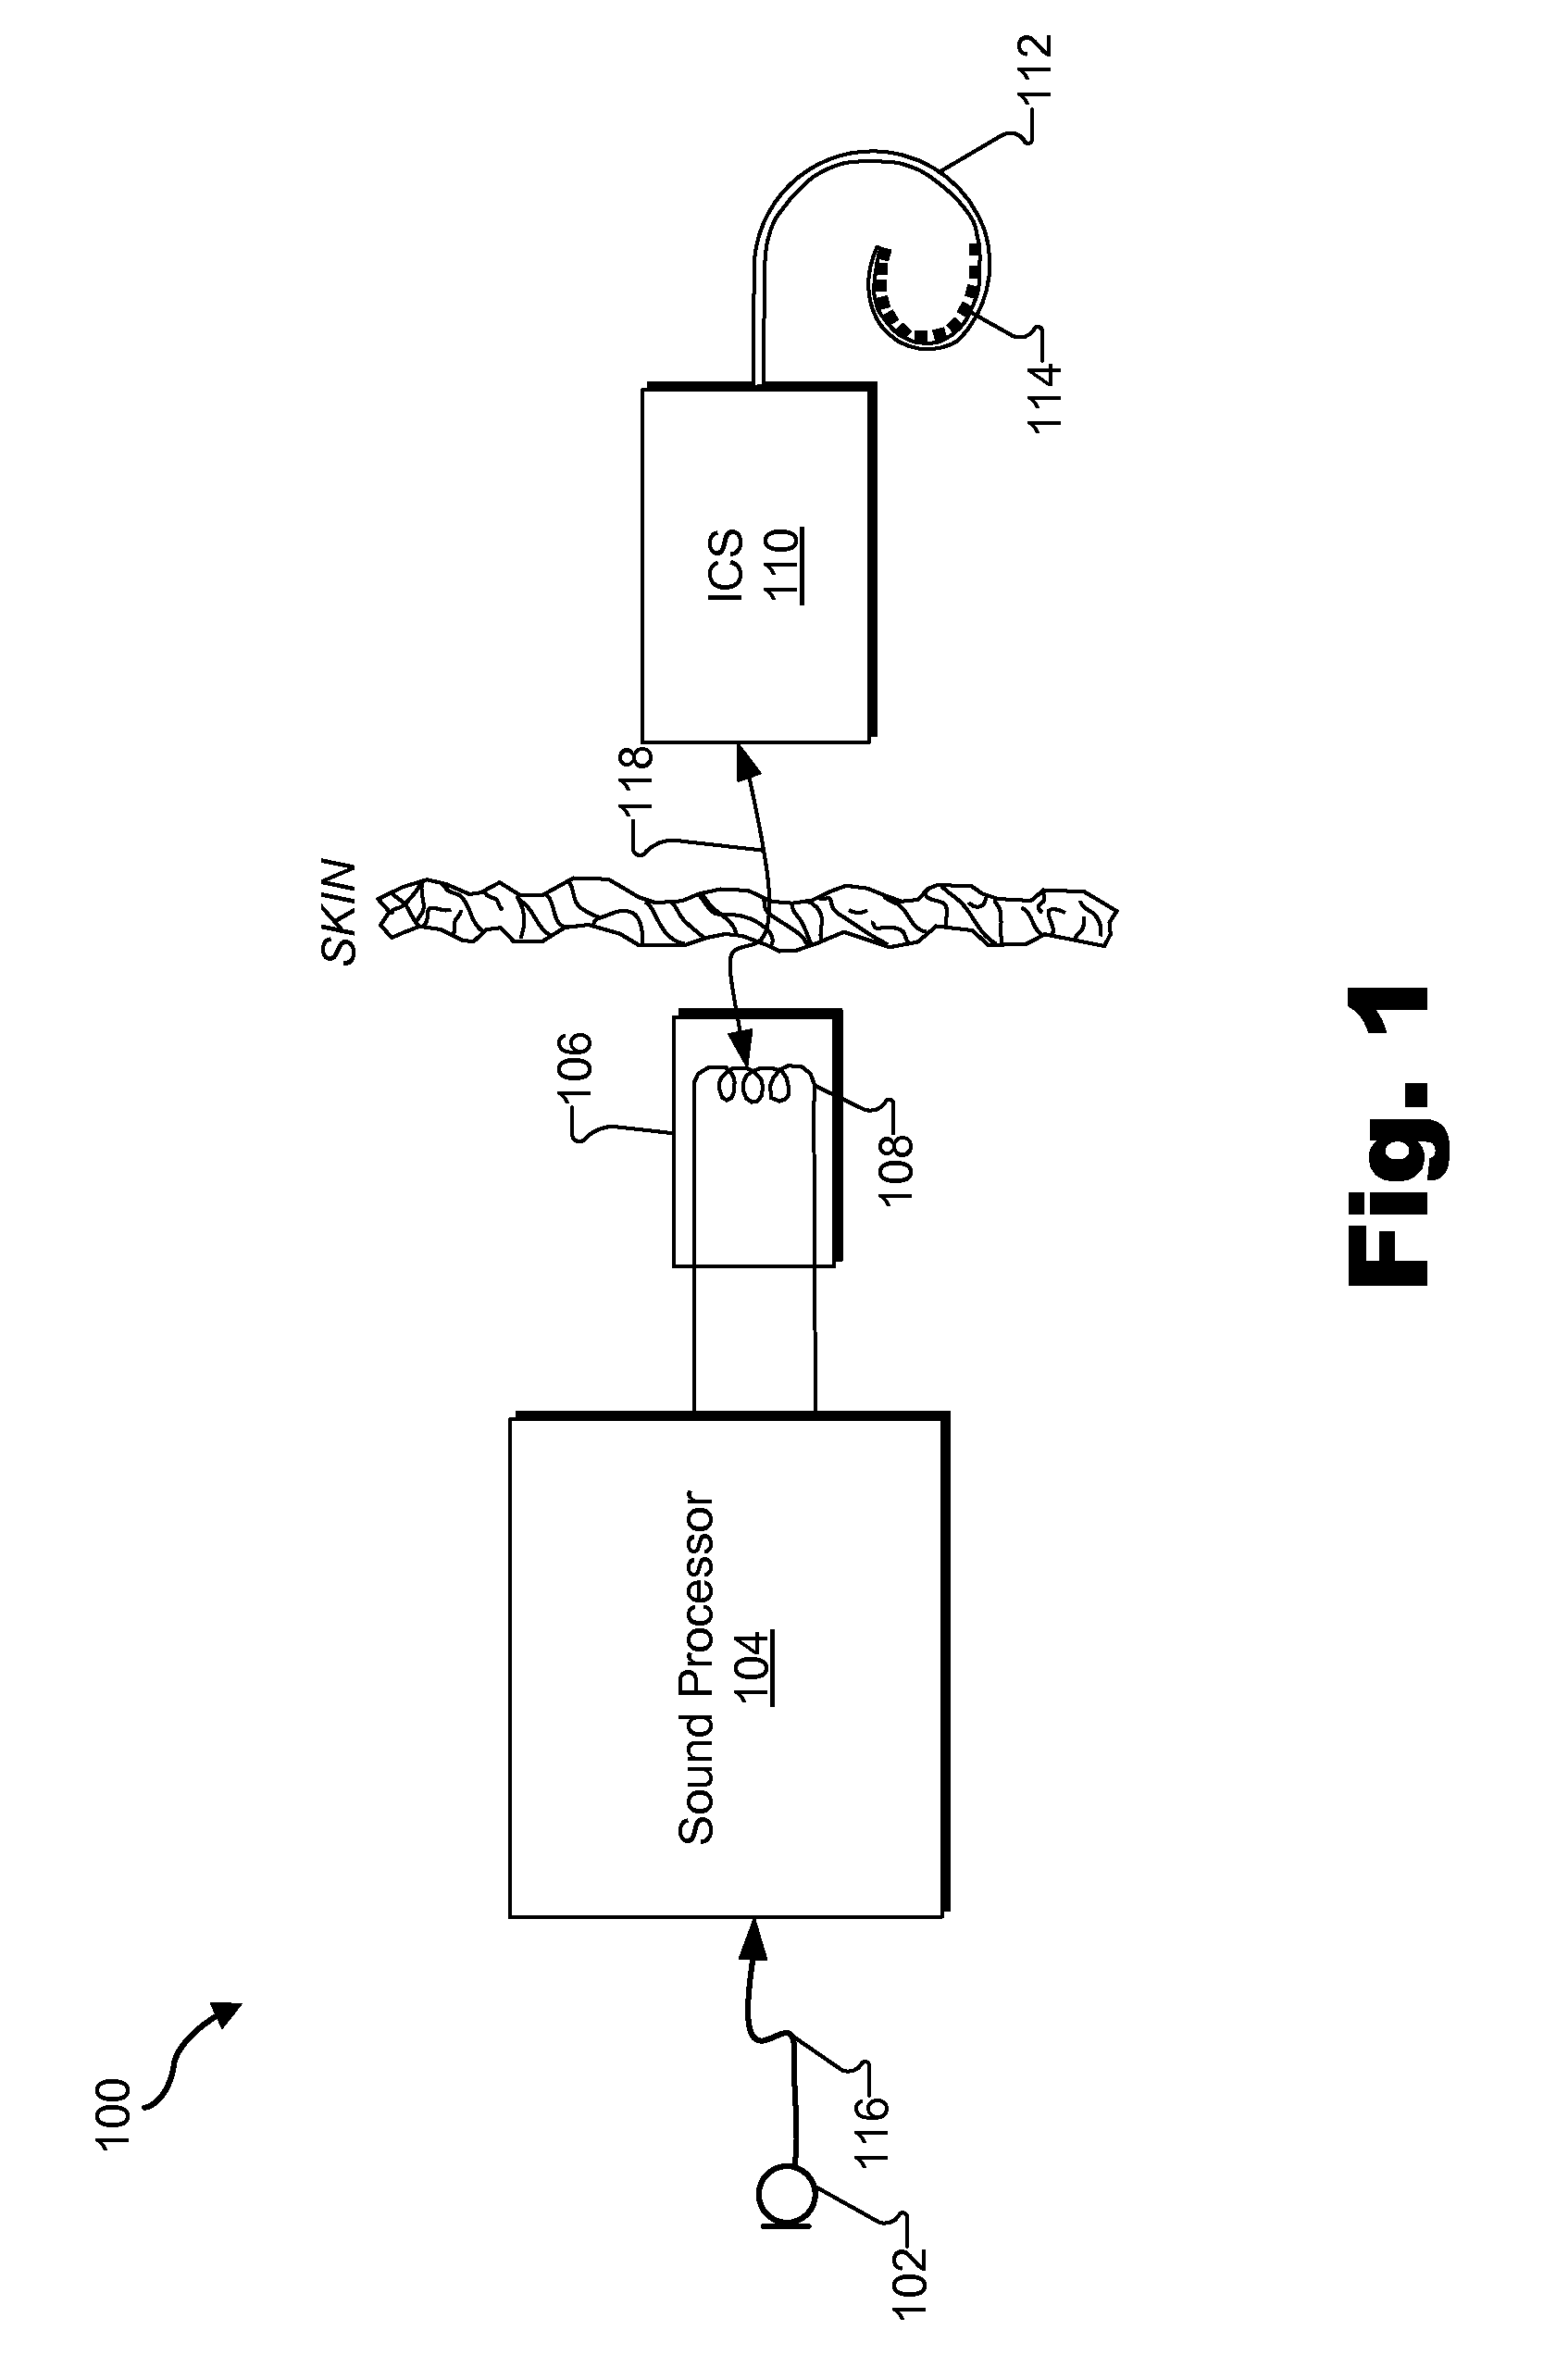 Methods and Systems for Fitting a Sound Processor to a Patient Using a Plurality of Pre-Loaded Sound Processing Programs